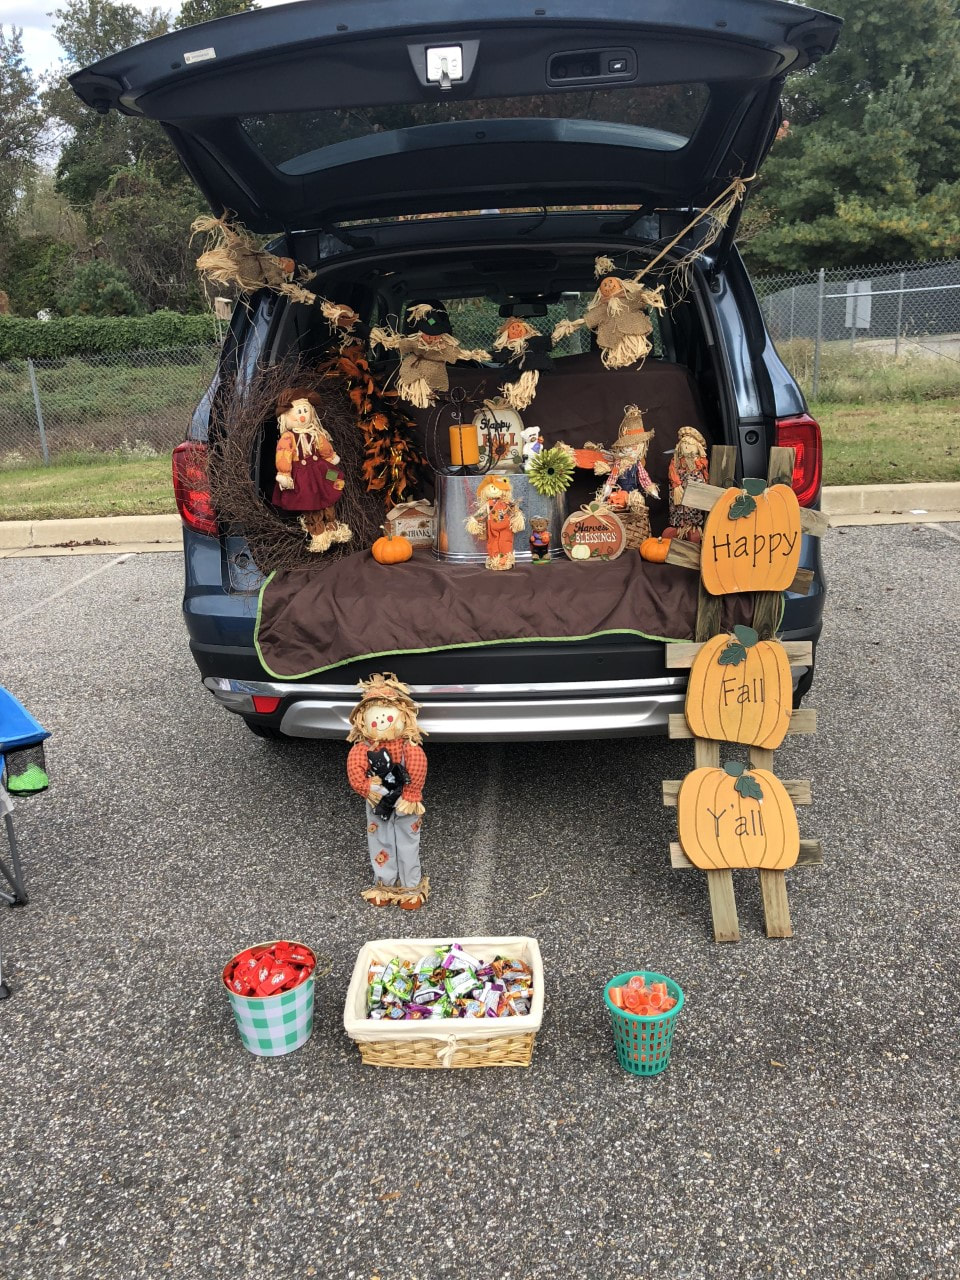 TRUNK OR TREAT Holy Family Catholic Church in Davidsonville, MD